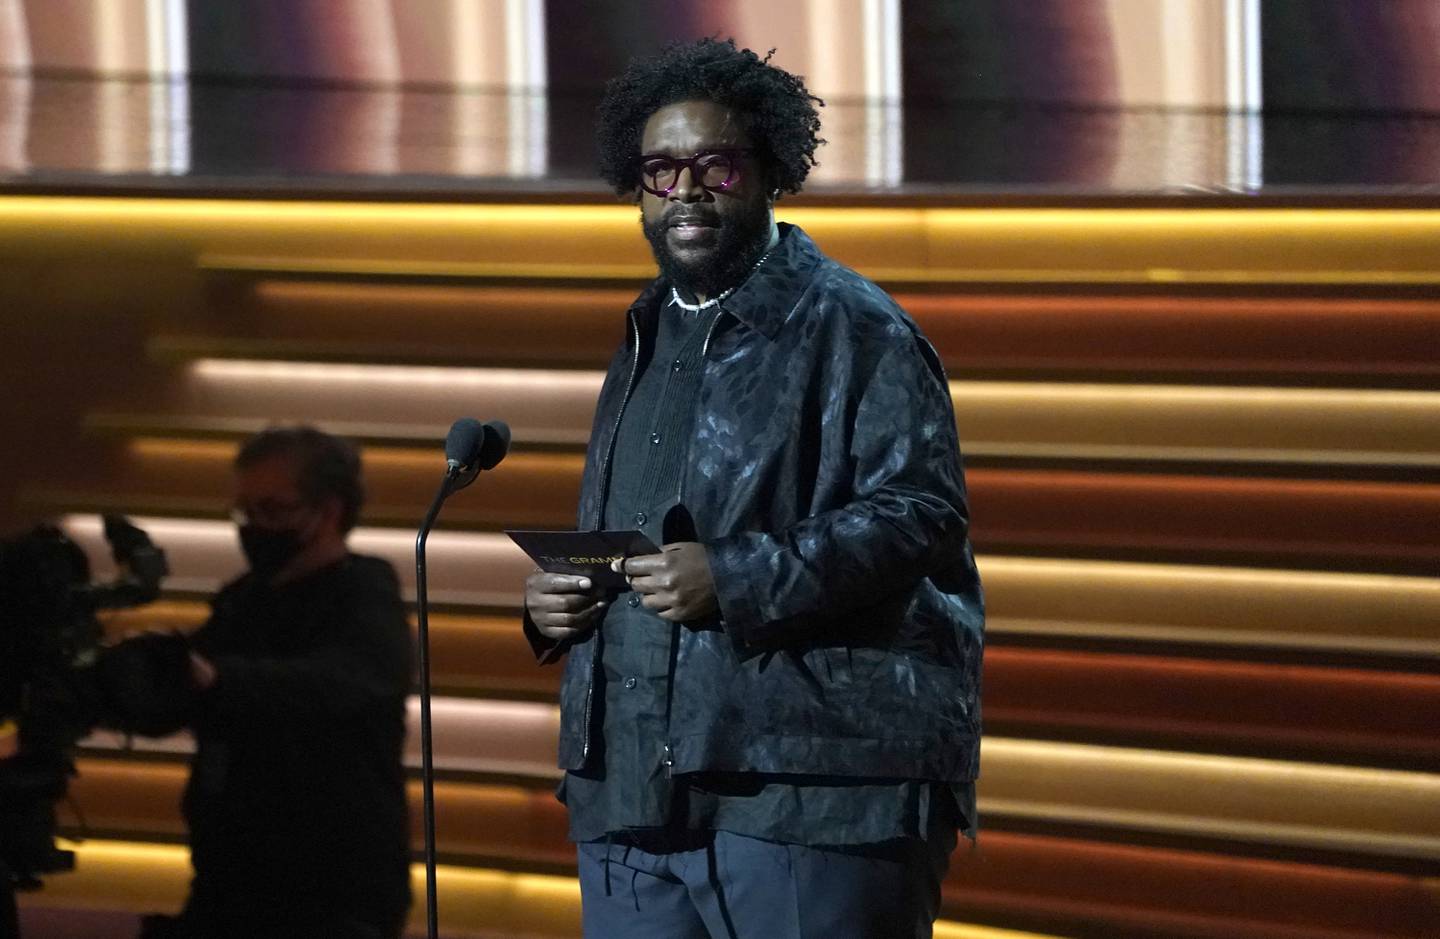 Questlove joked about Will Smith slapping Chris Rock when presenting the award for Song of the Year at the 64th Grammy Awards on Sunday, April 3, 2022, in Las Vegas. AP